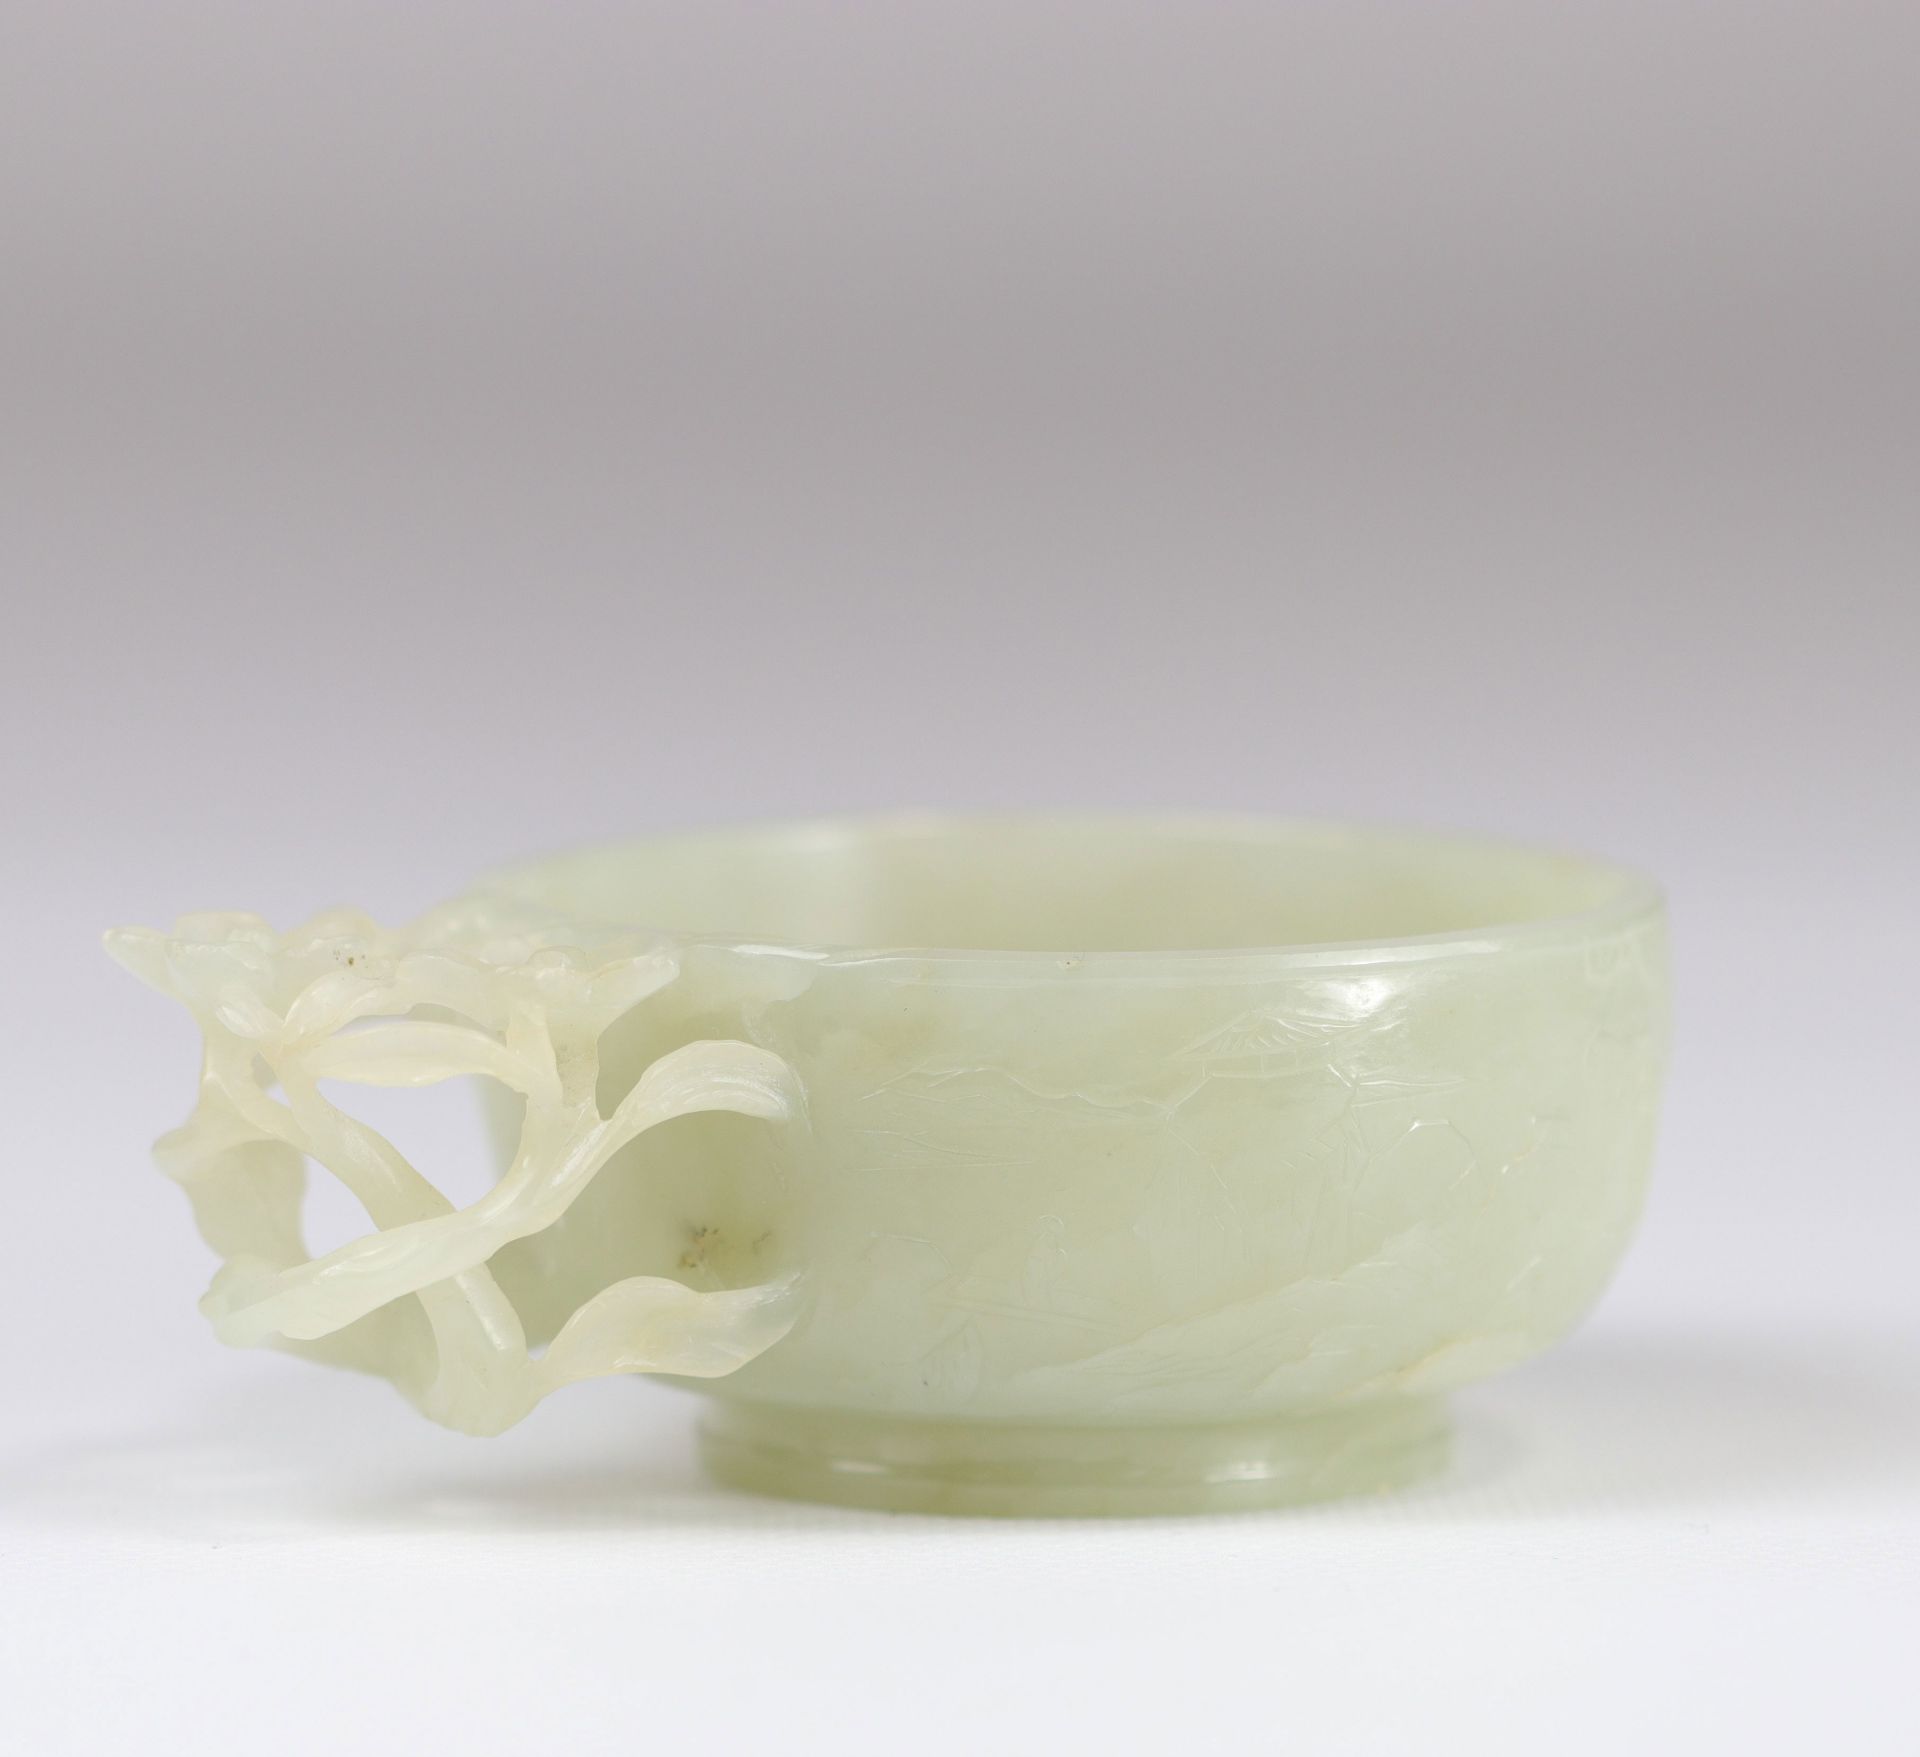 White jade water pot with vegetable decoration, Qing dynasty China - Image 6 of 10